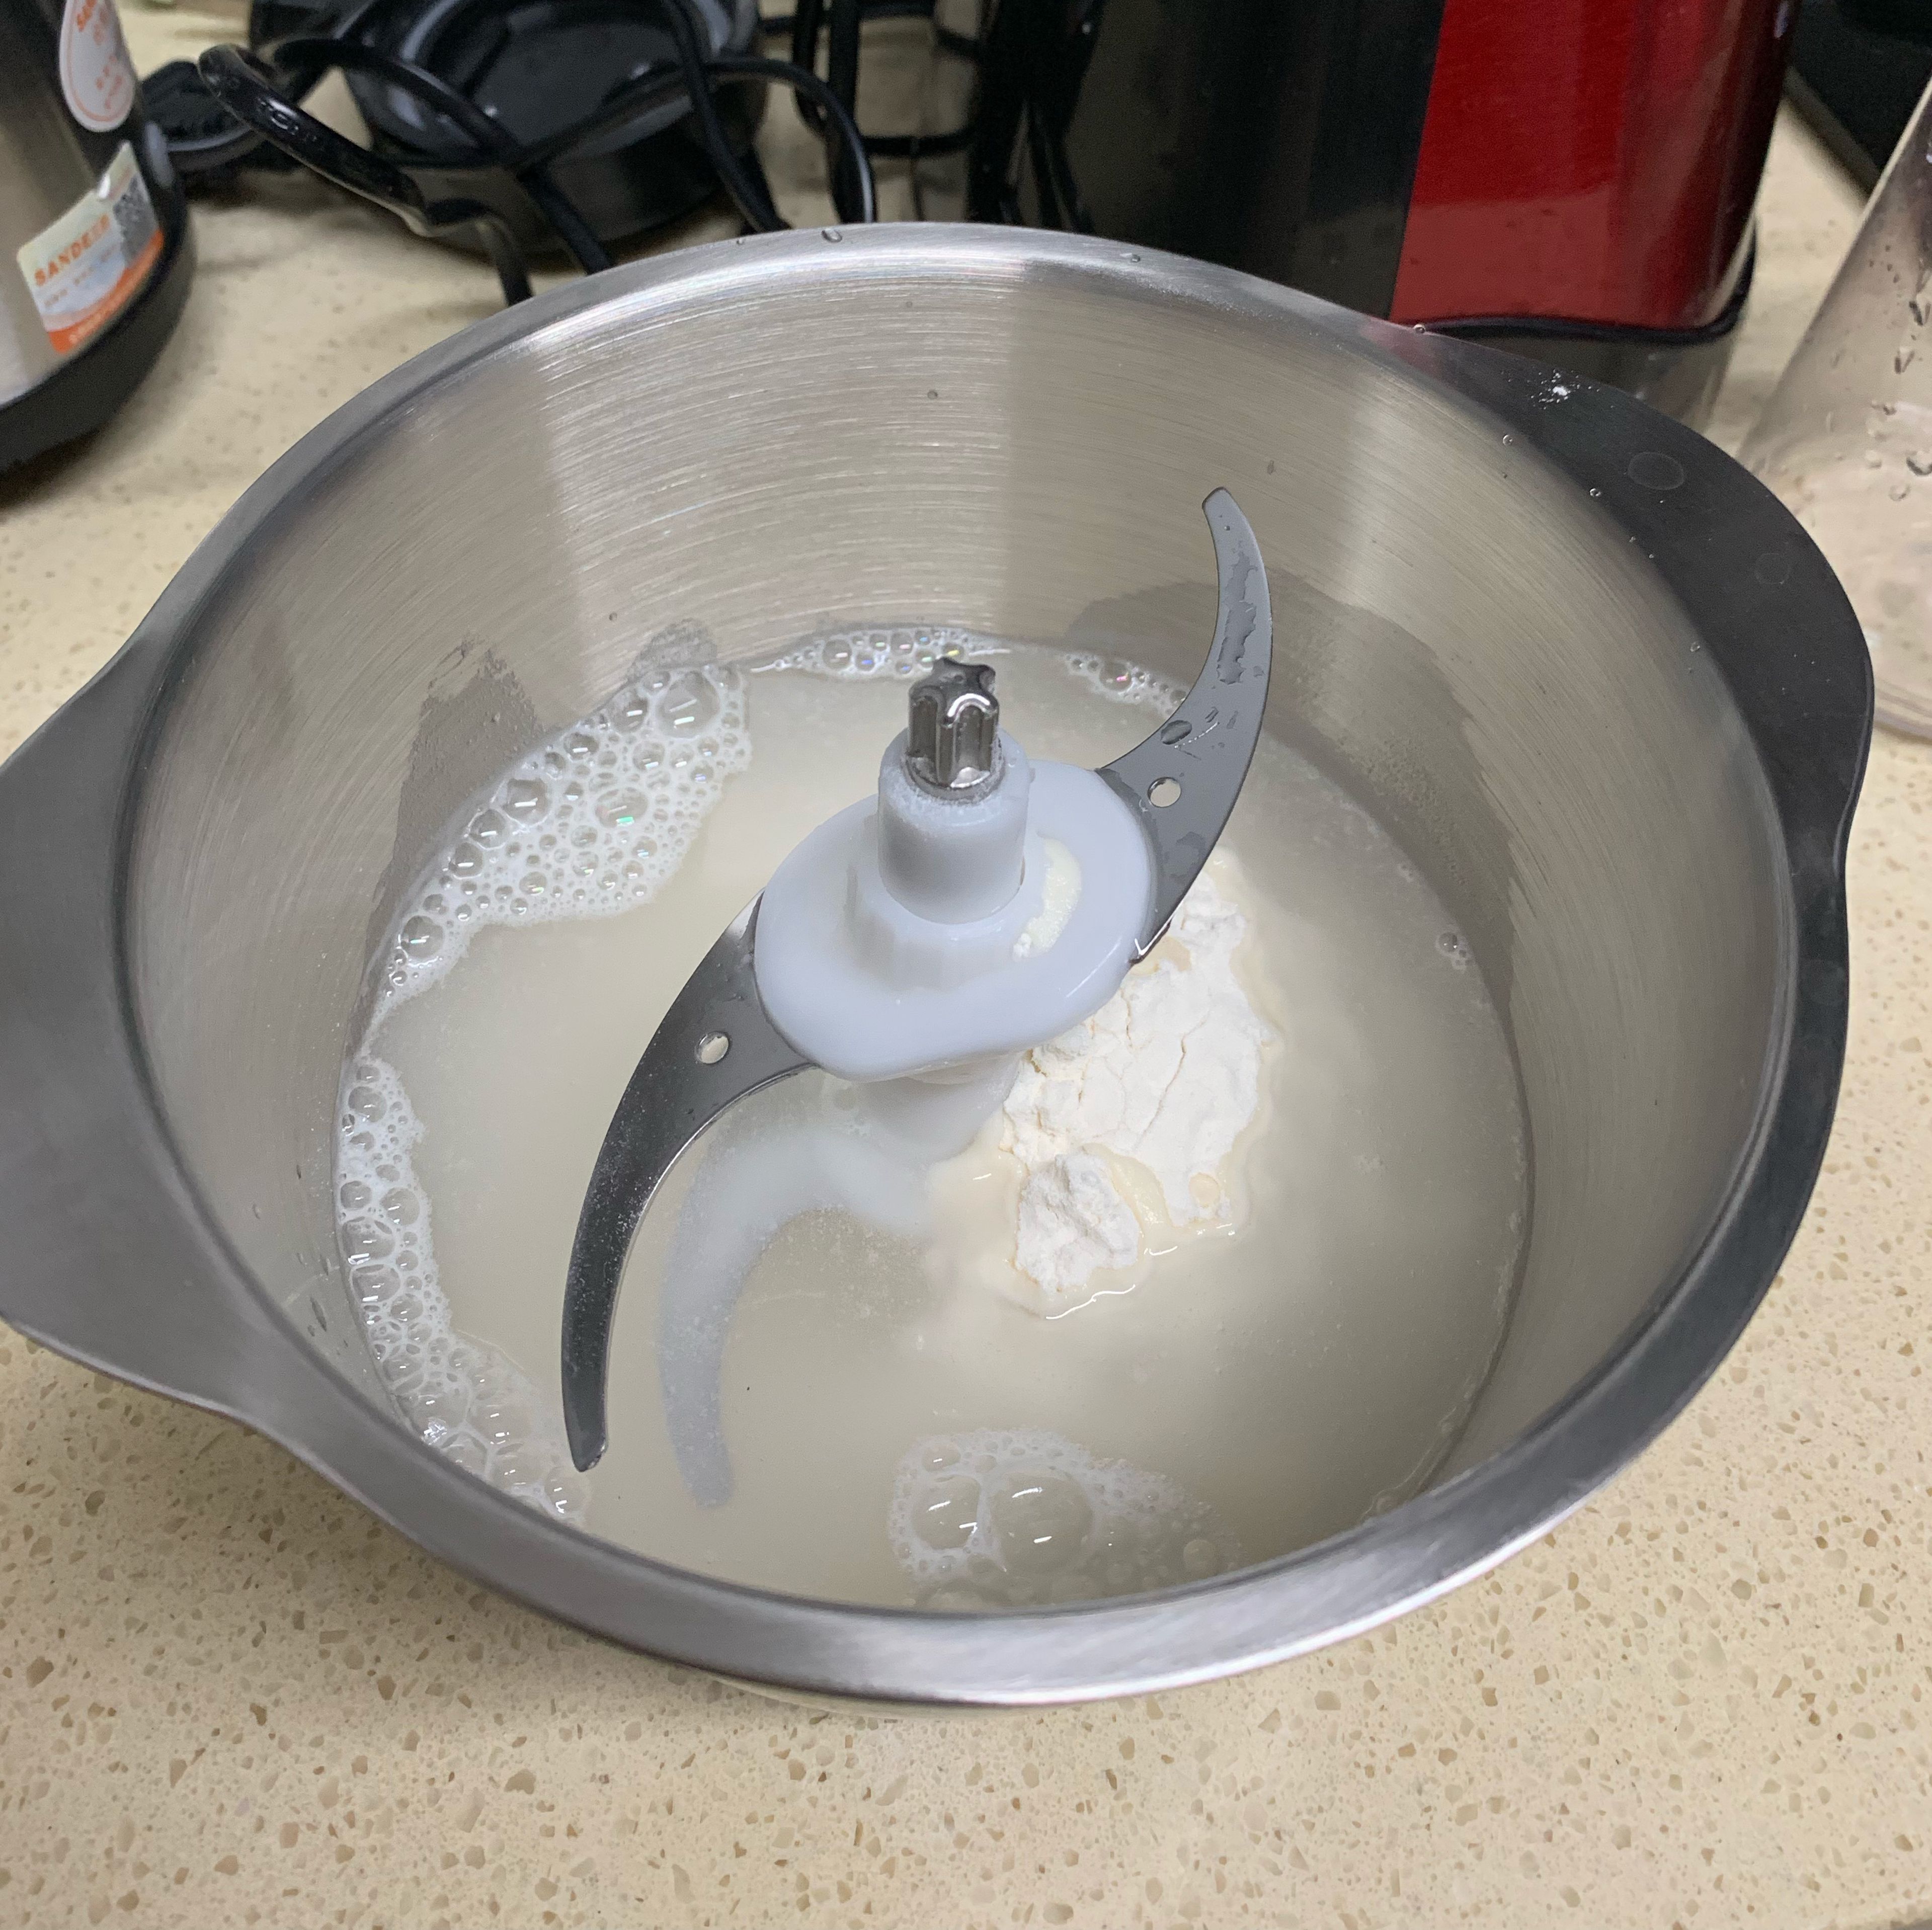 In a mixer beat together flour, a pinch of salt, and water for 5 minutes until a smooth dough forms.